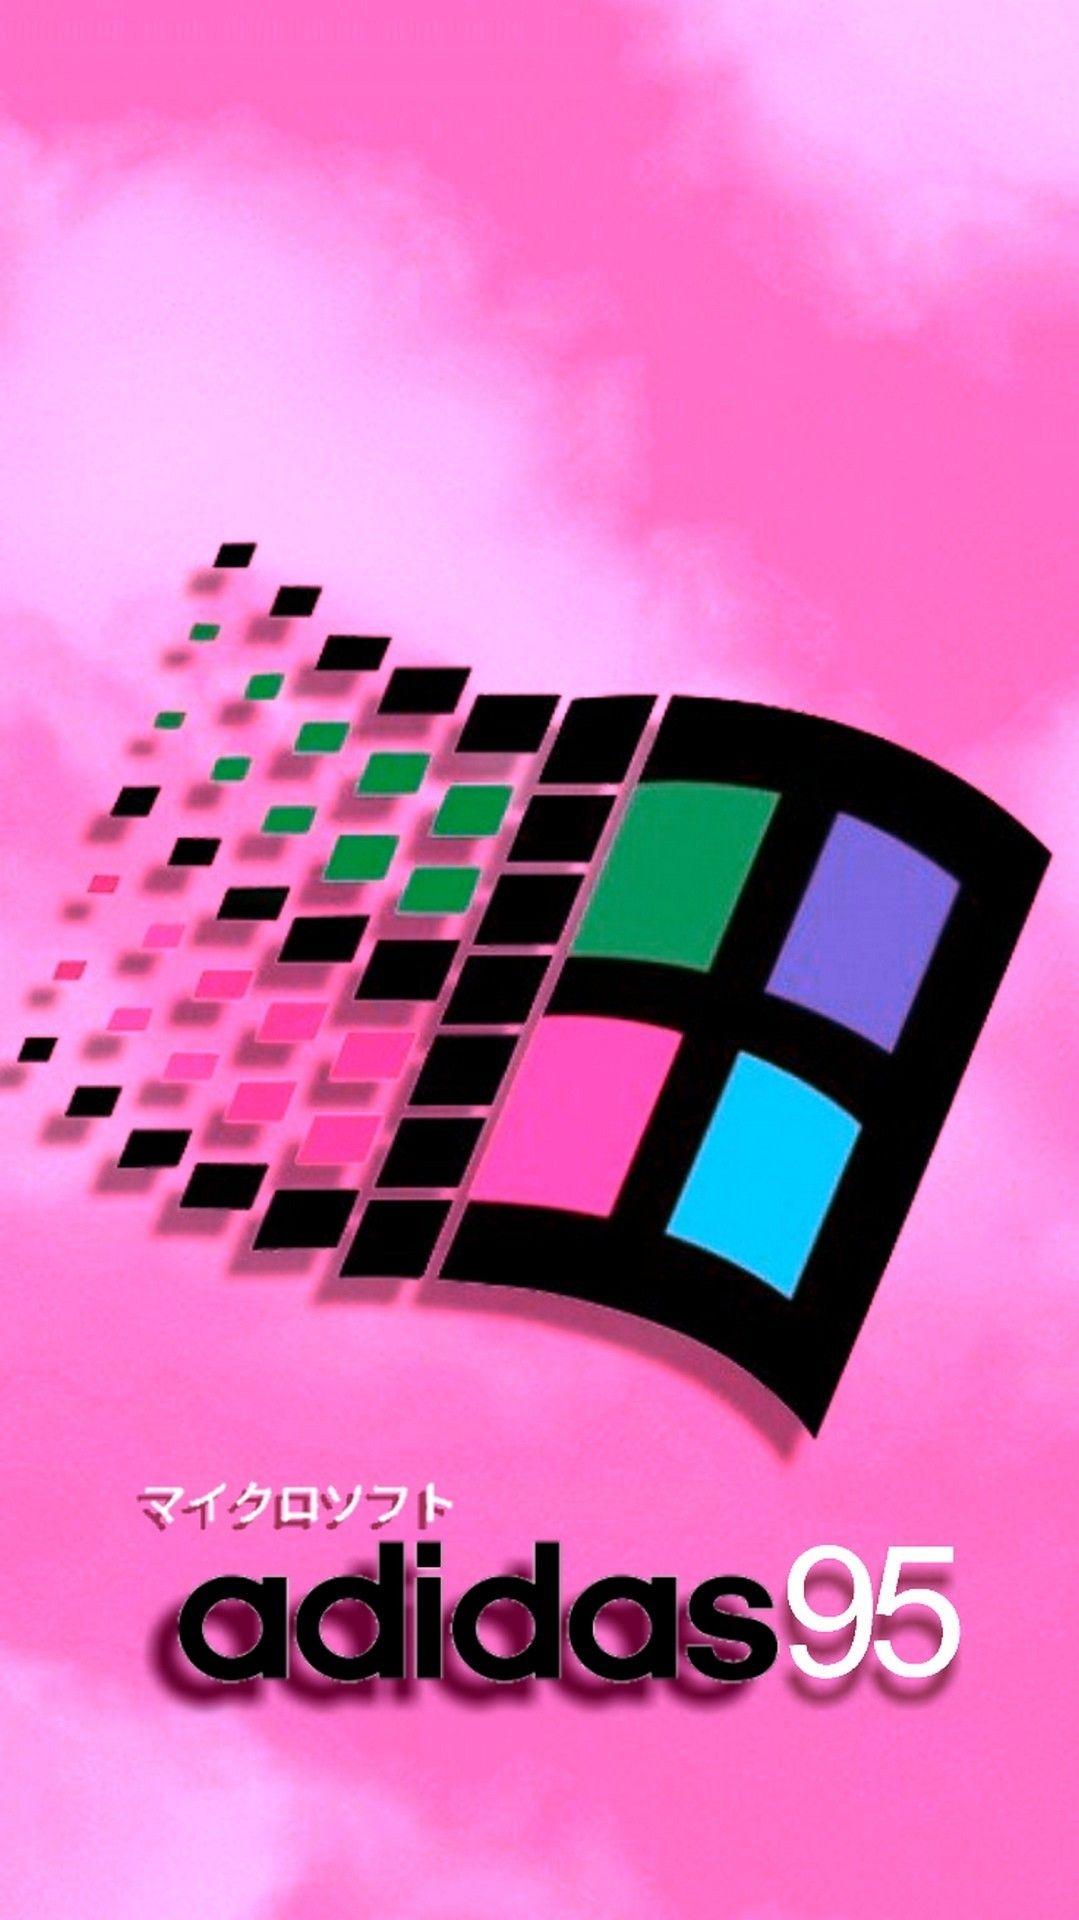 Windows 95 / 98 Logo (with text) on Classic Sky